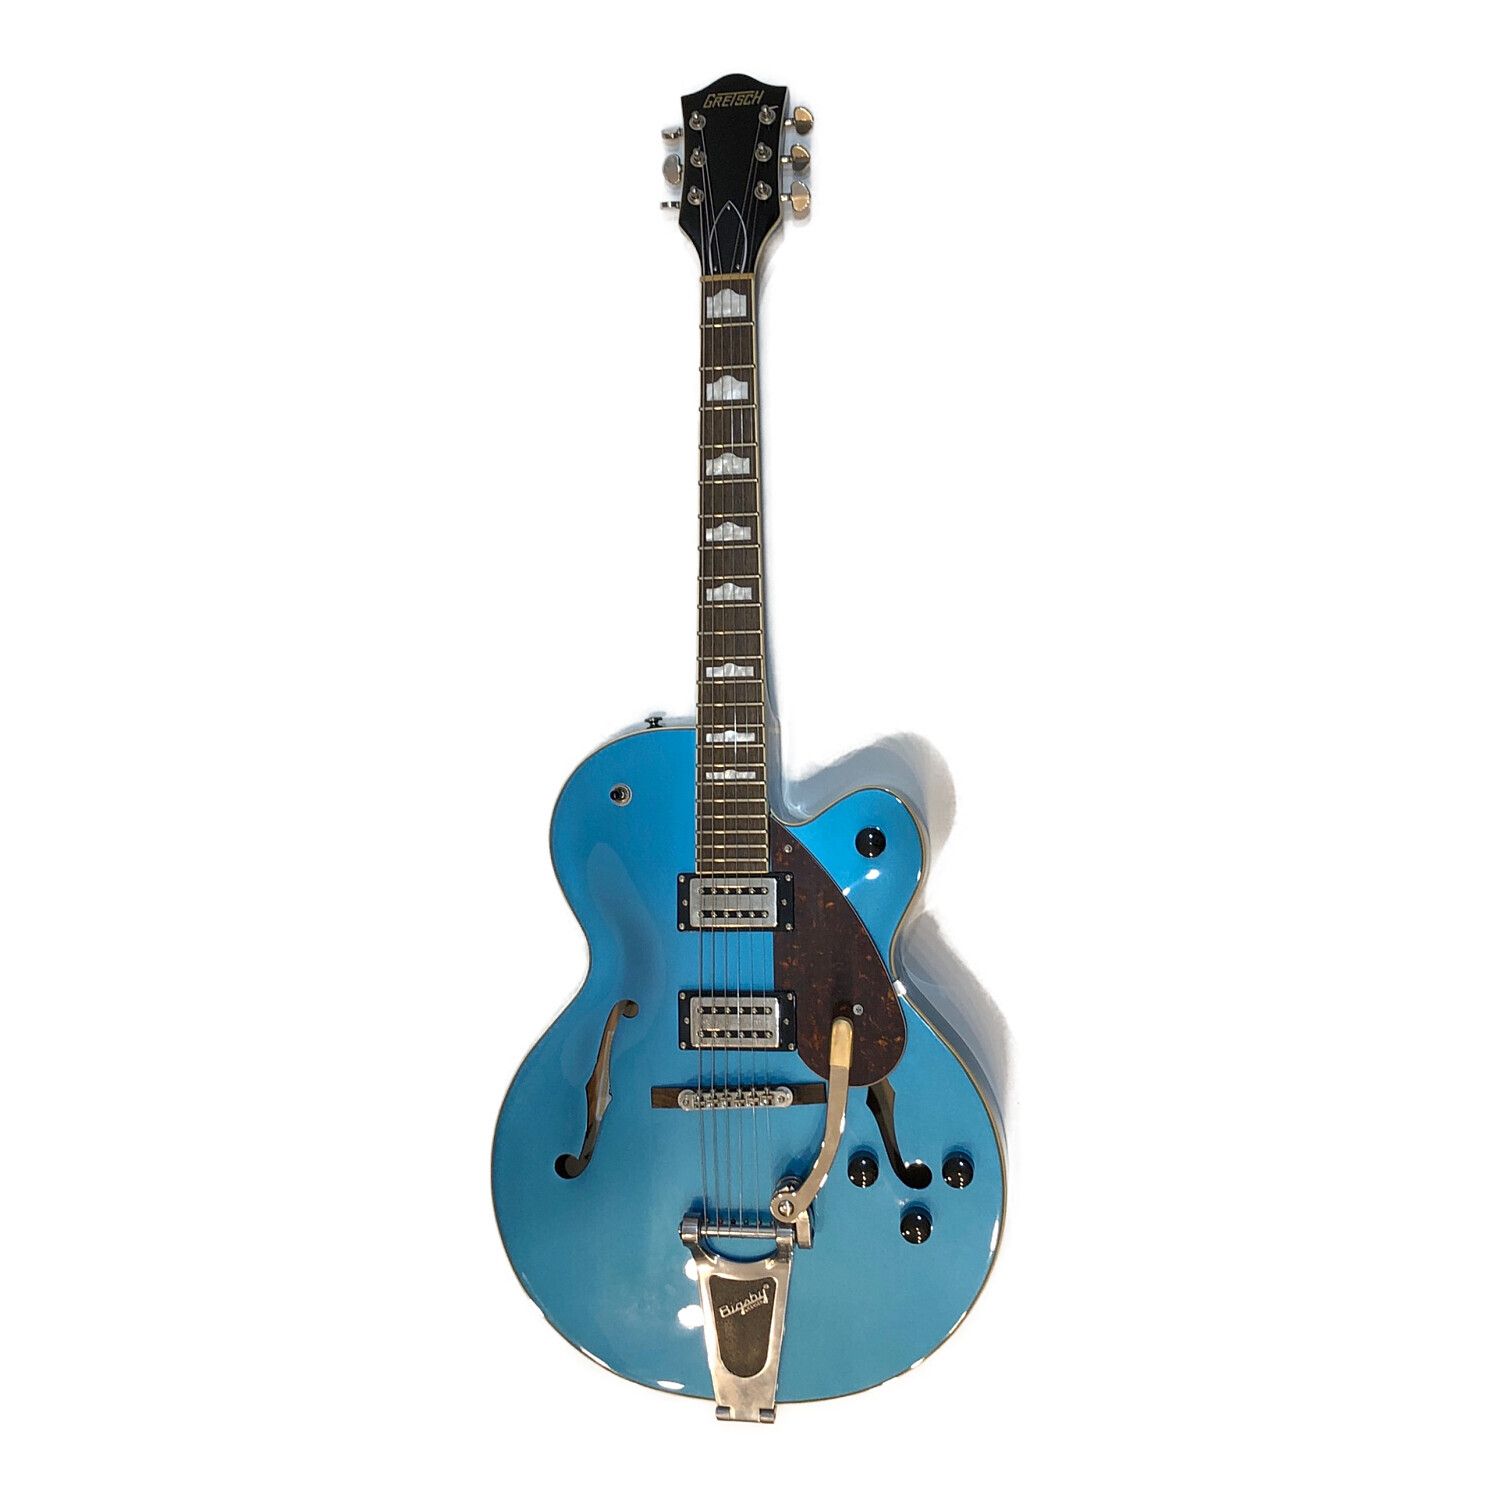 GRETSCH (グレッチ) フルアコギター Streamliner Hollow Body with 